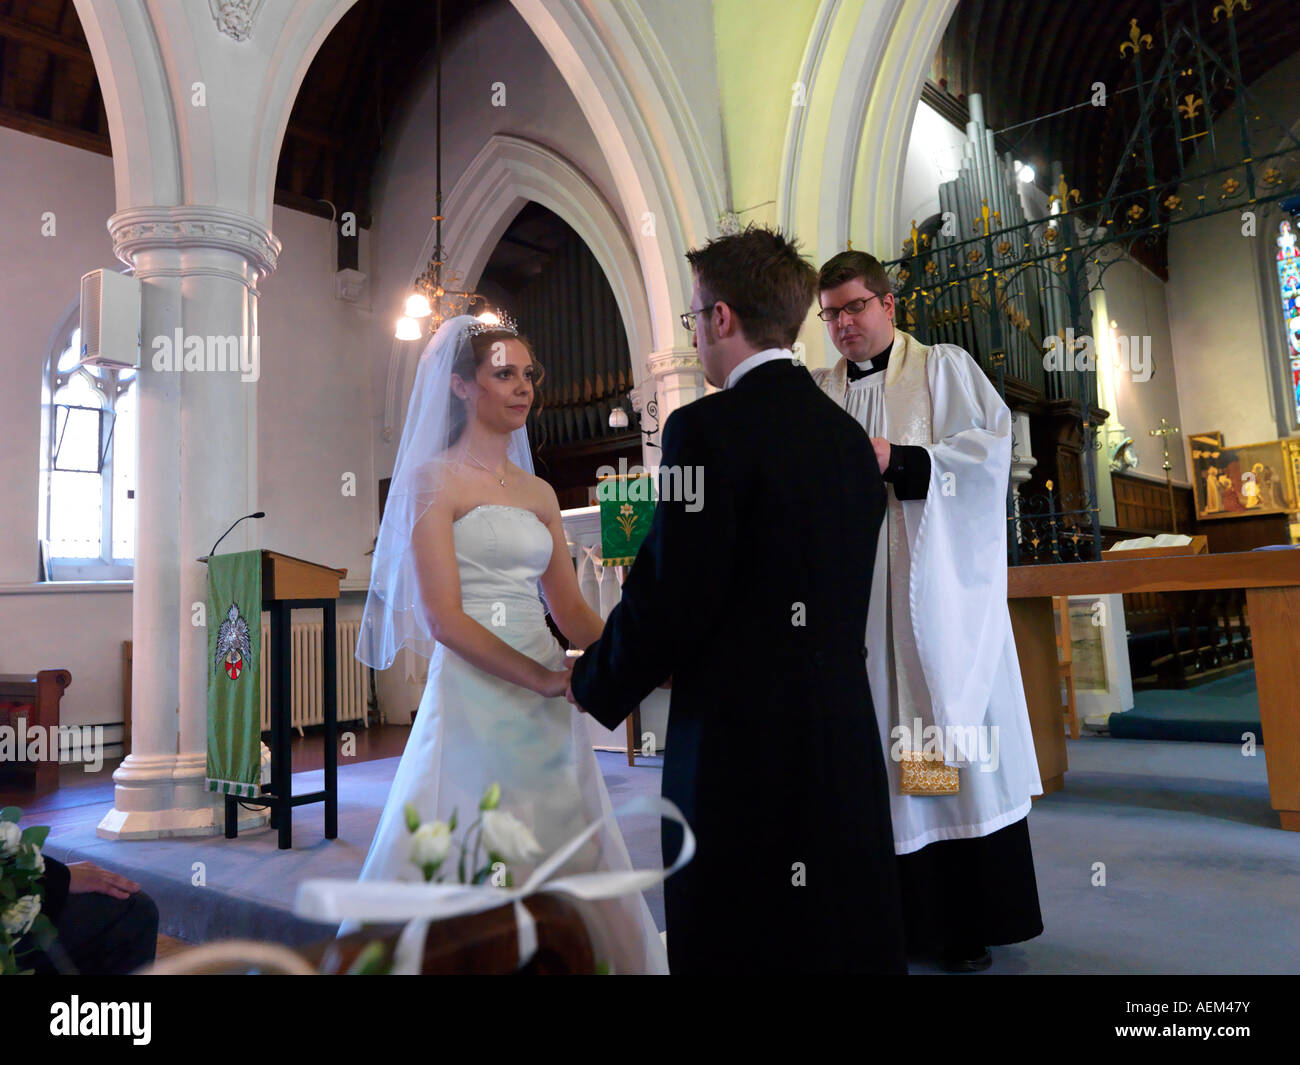 Exchanging Vows During an Anglican Wedding Service Stock Photo